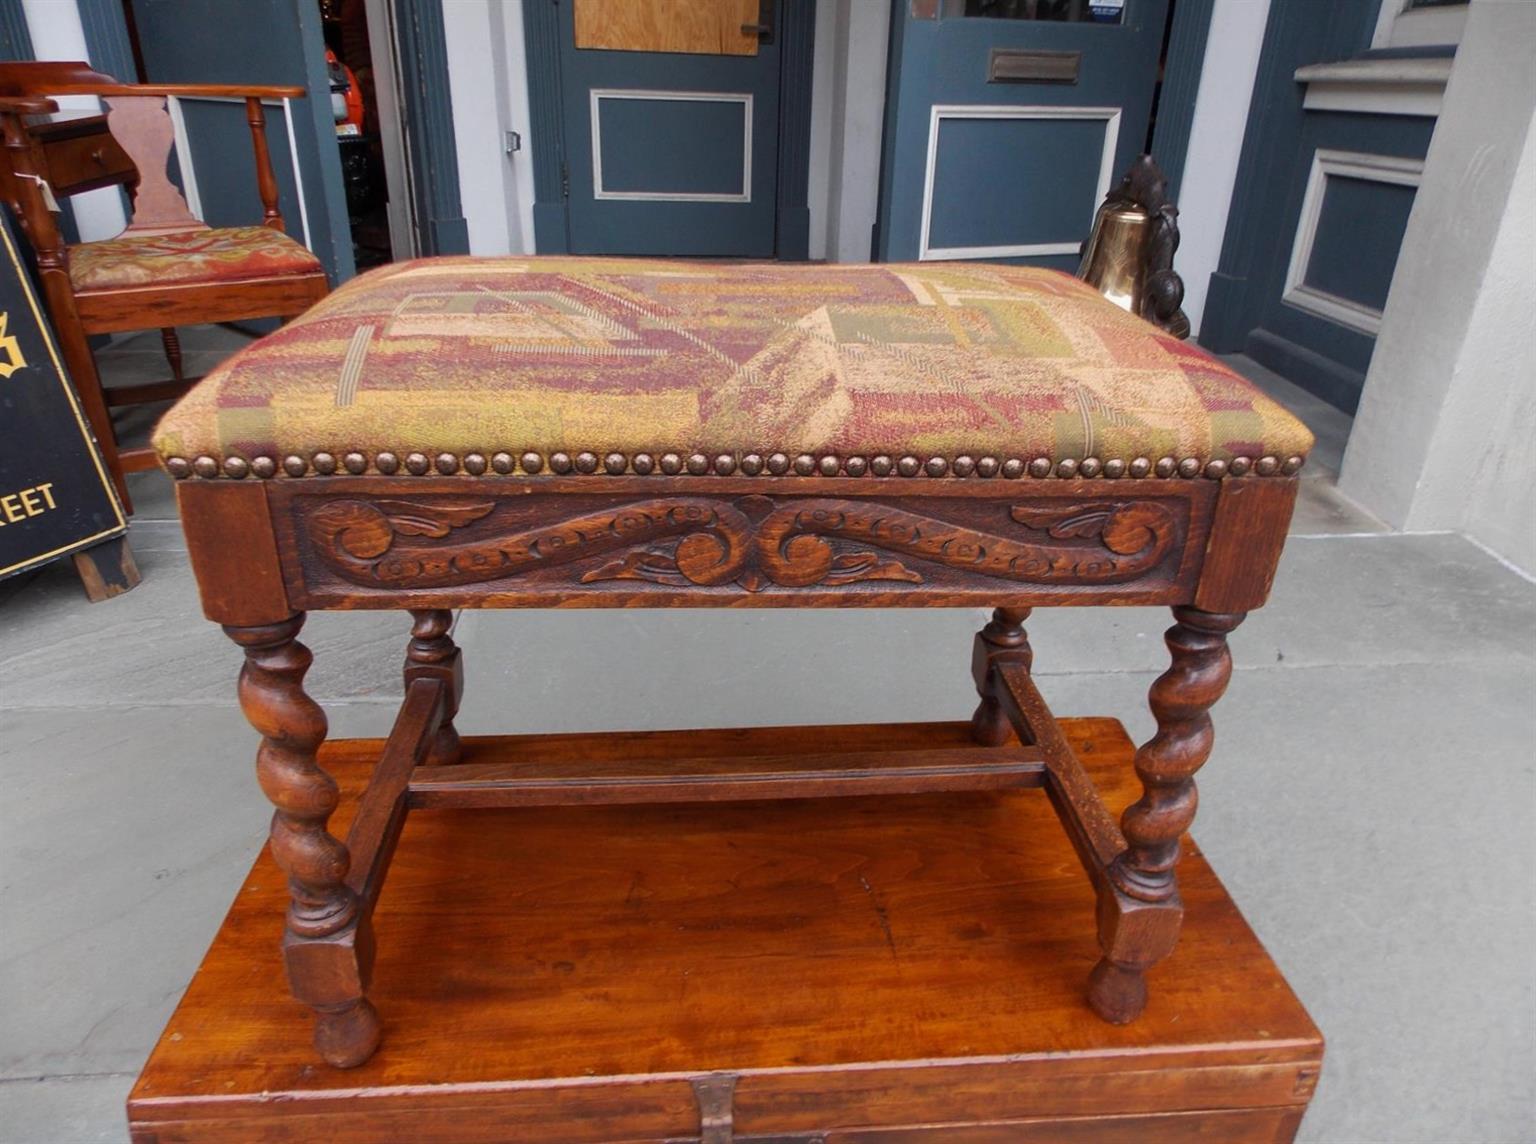 Hand-Crafted French Walnut Decorative Carved Upholstered Stool with Barley Twist Legs, C 1850 For Sale